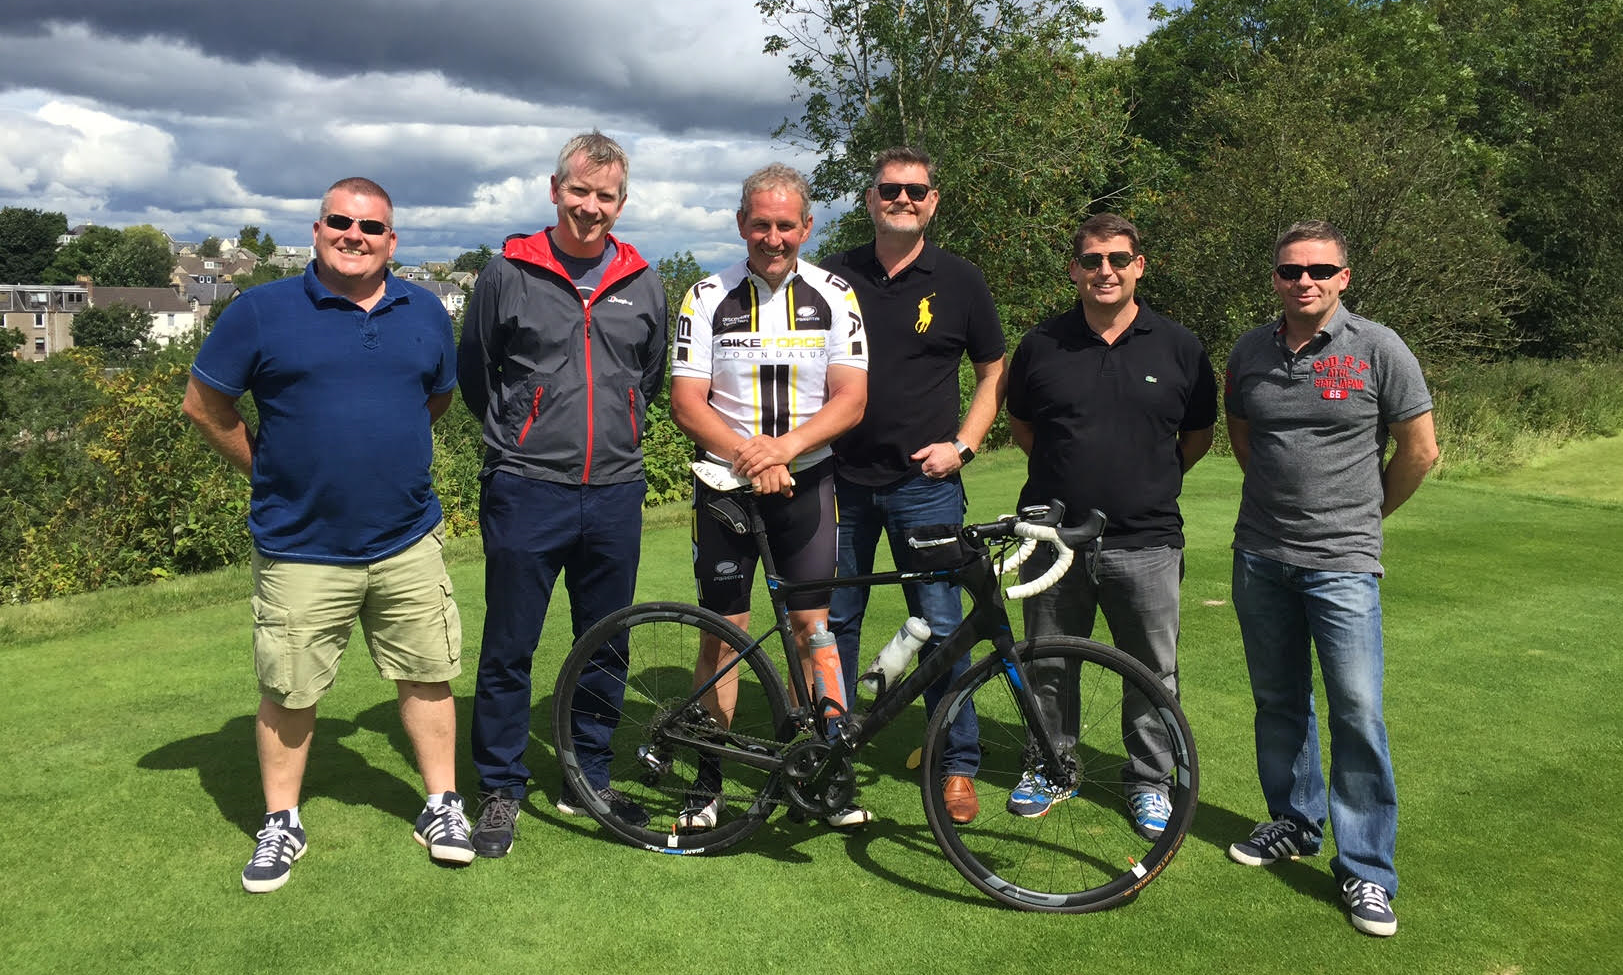 Mission accomplished: The Beveridge cycle group (from left) Neil McDonald, Bruce Bannerman, Grant Beveridge, Athole McDonald, Ross Middleton and Ally Johnston.